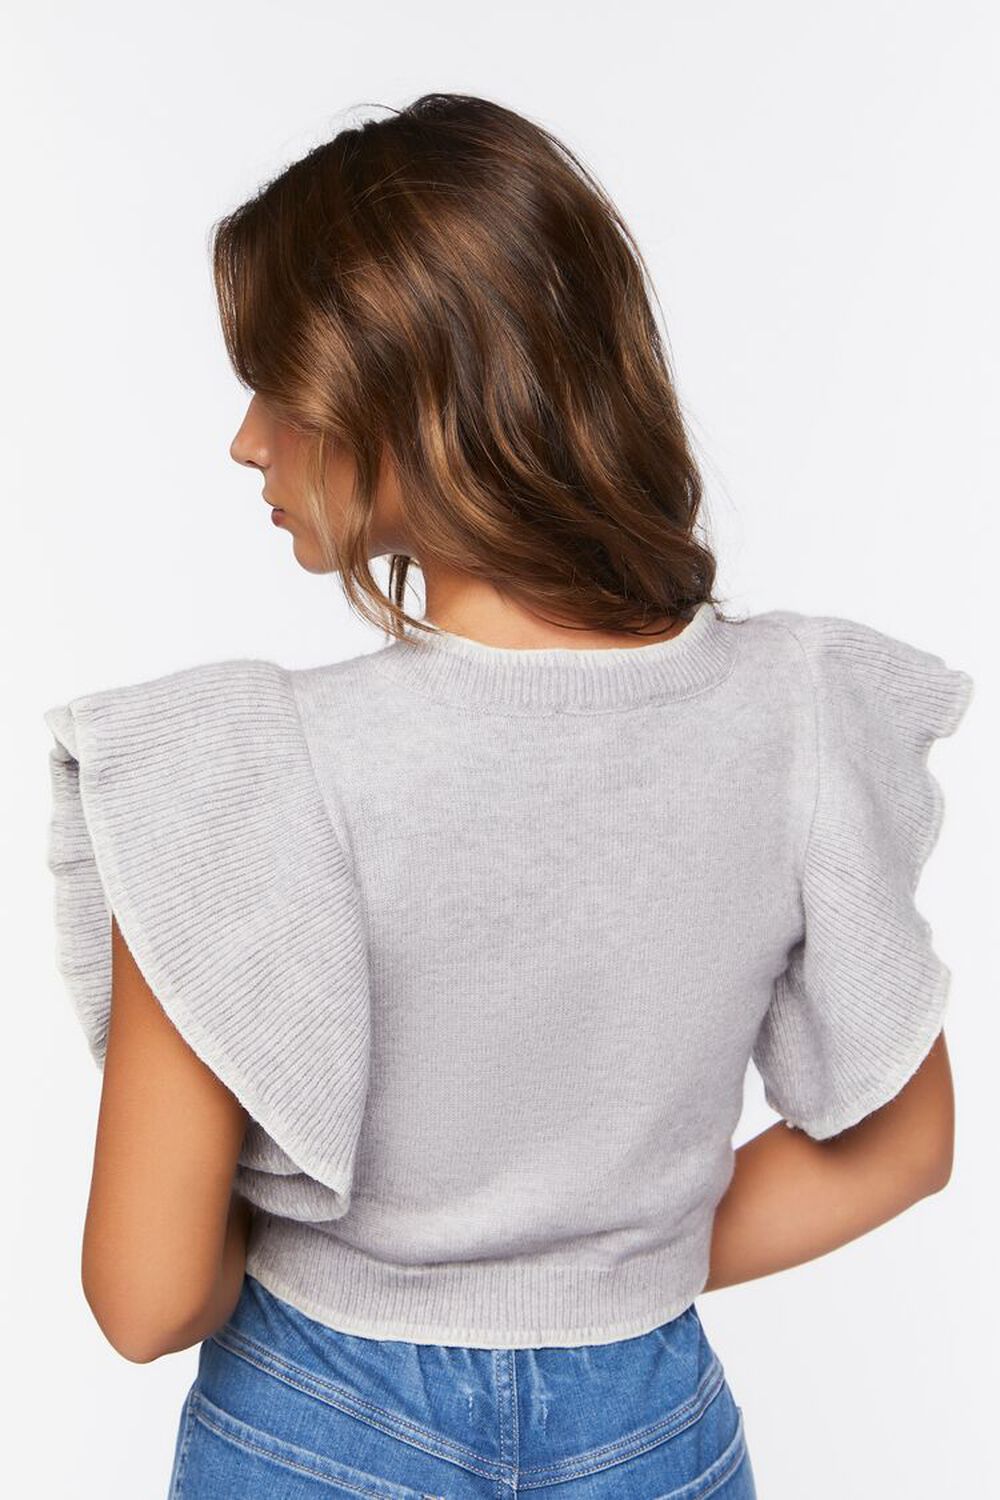 GREY/CREAM Butterfly Sleeve Sweater Top, image 3